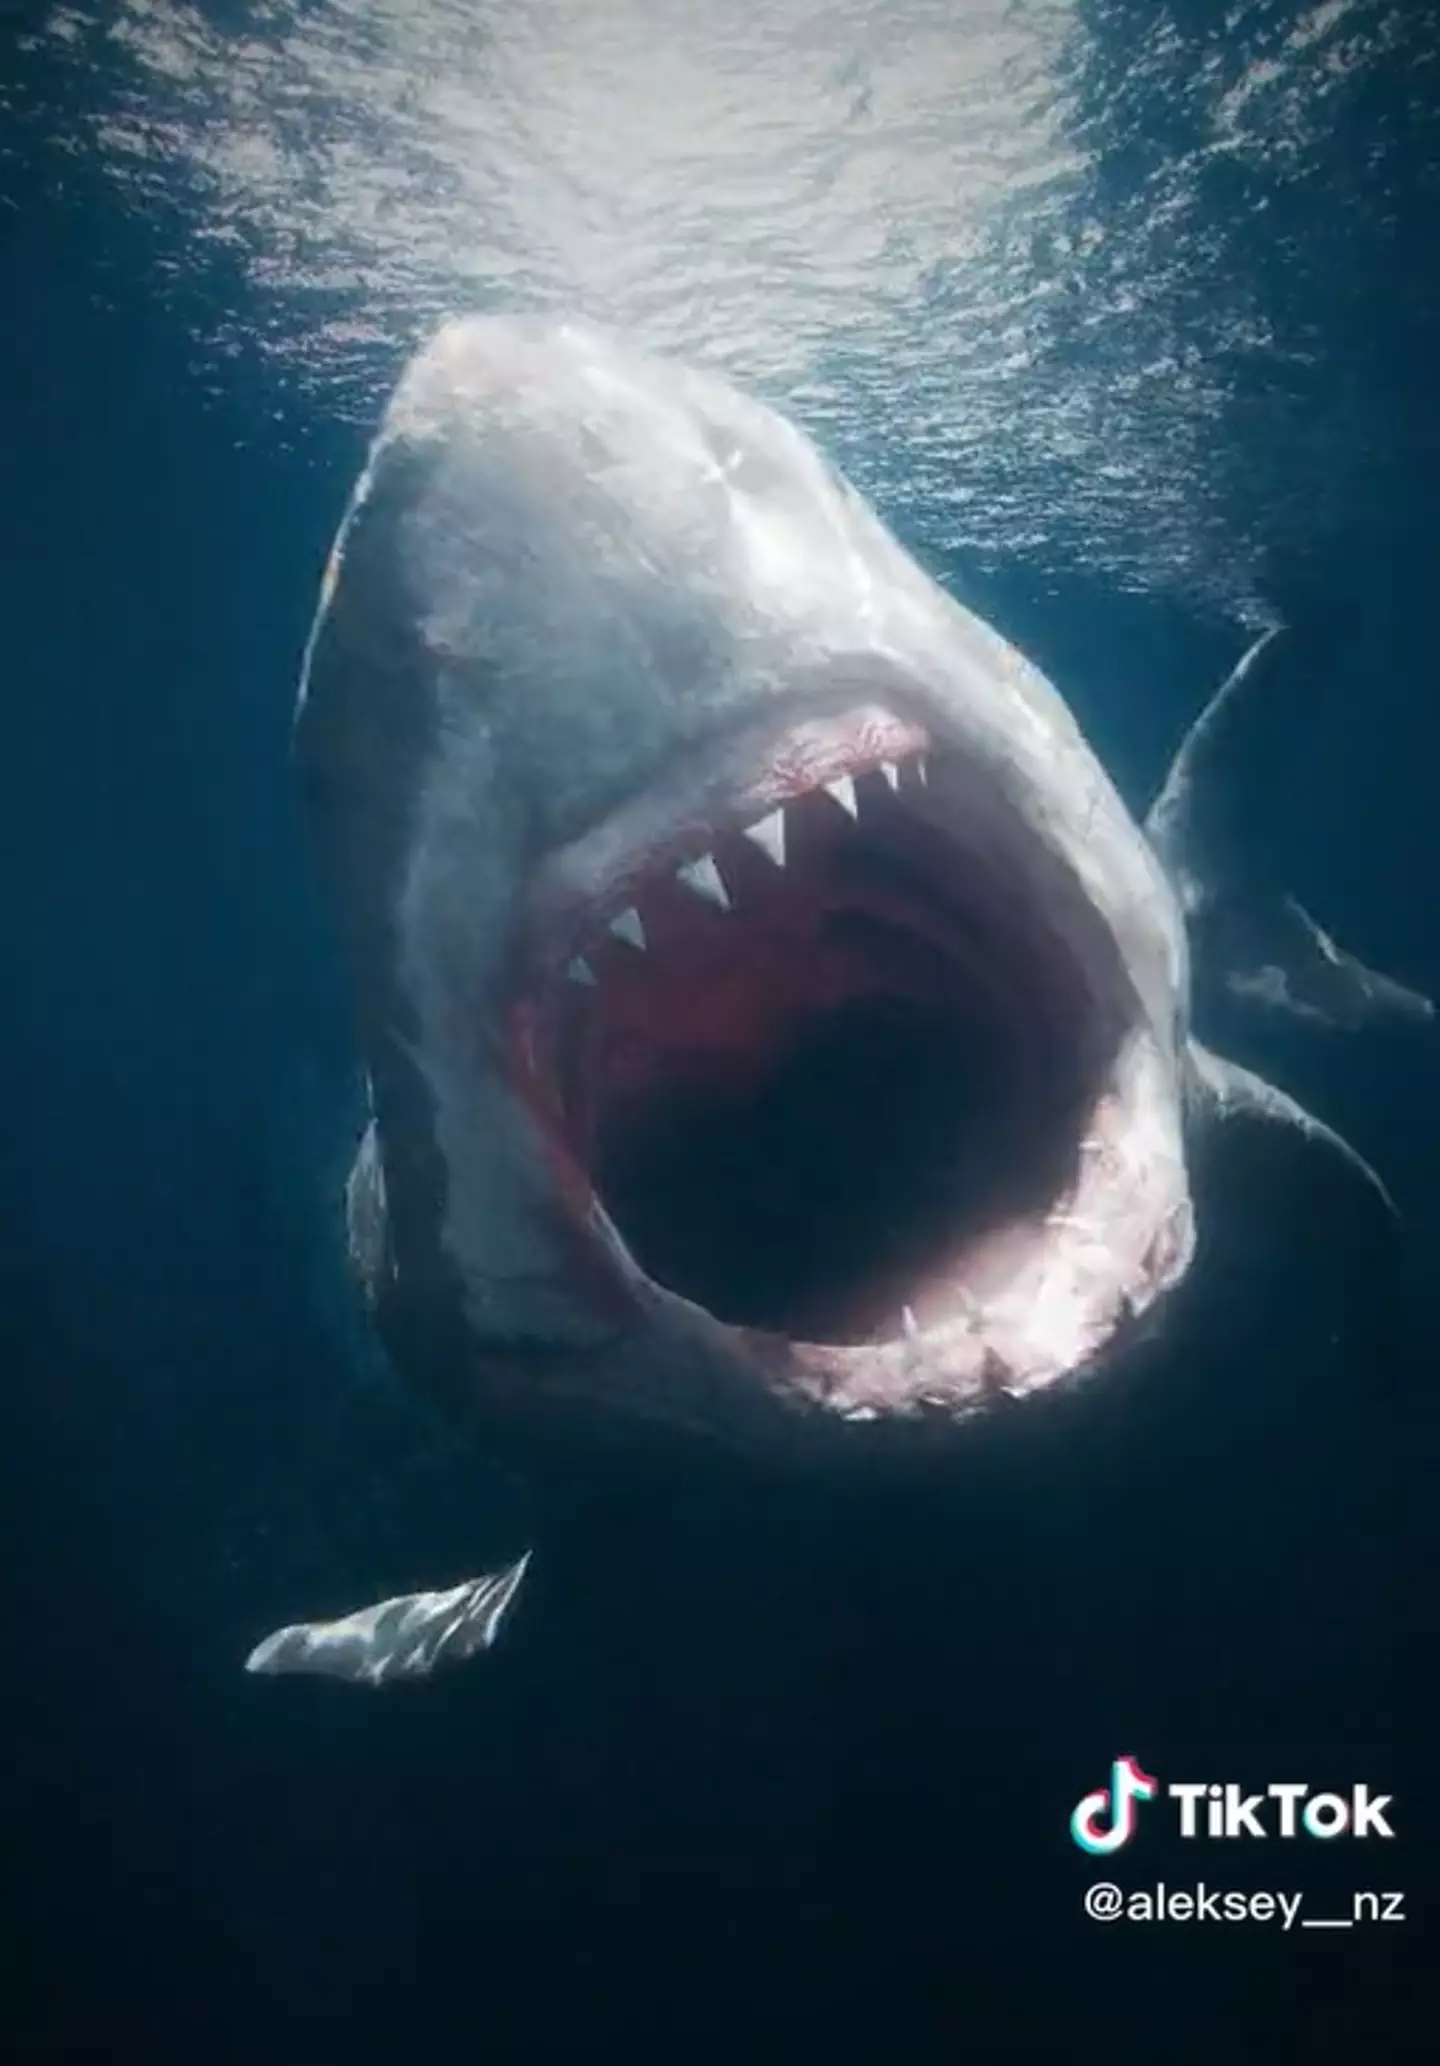 The megalodon is on the rampage in this video.